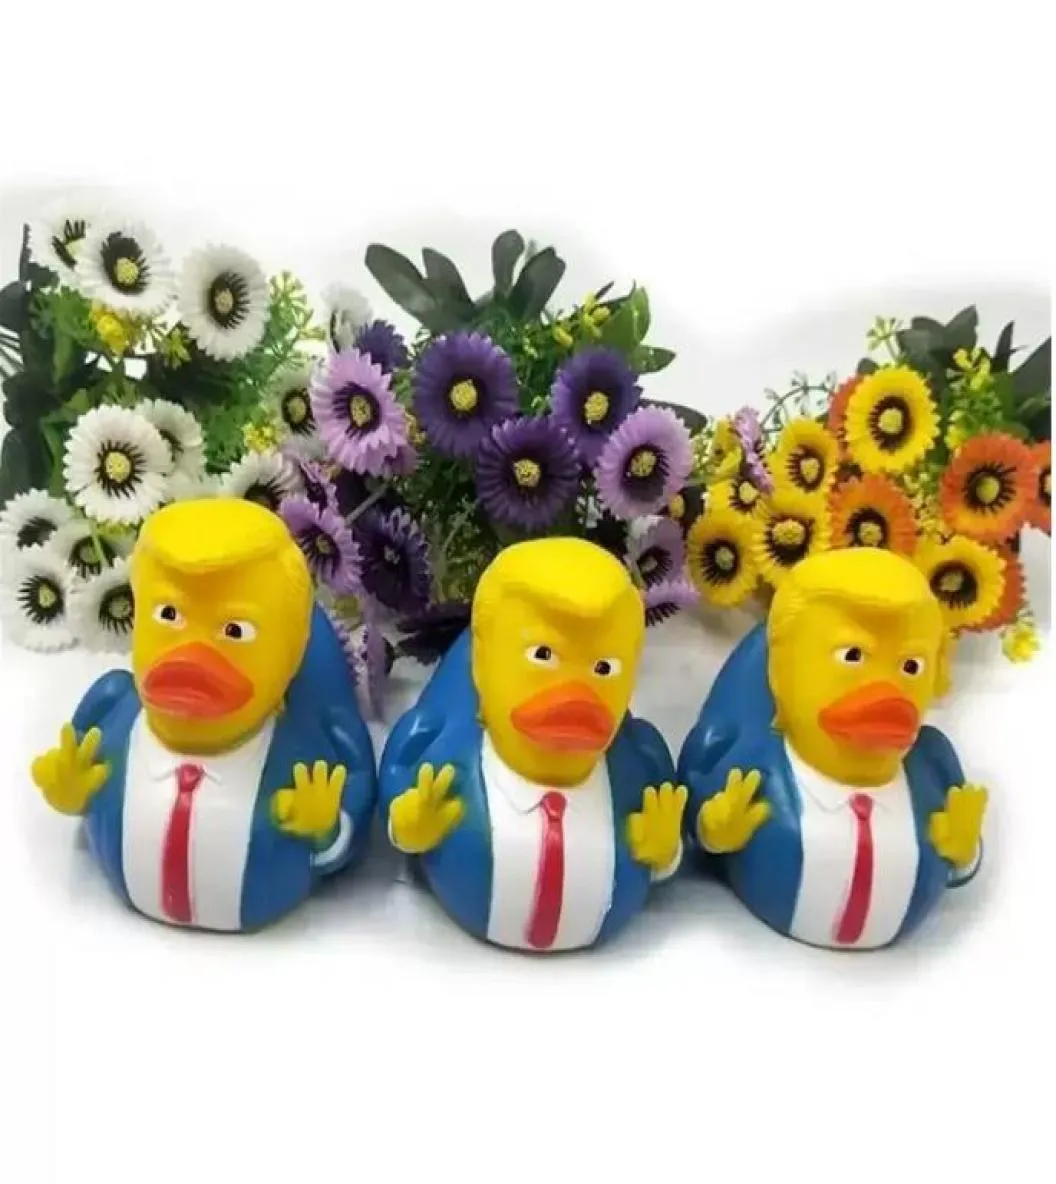 DHL Duck Bath Toy Novelty Items PVC Trump Ducks Shower Floating US President Doll Showers Water Toys Novelty Kids Gifts Whole 2414763